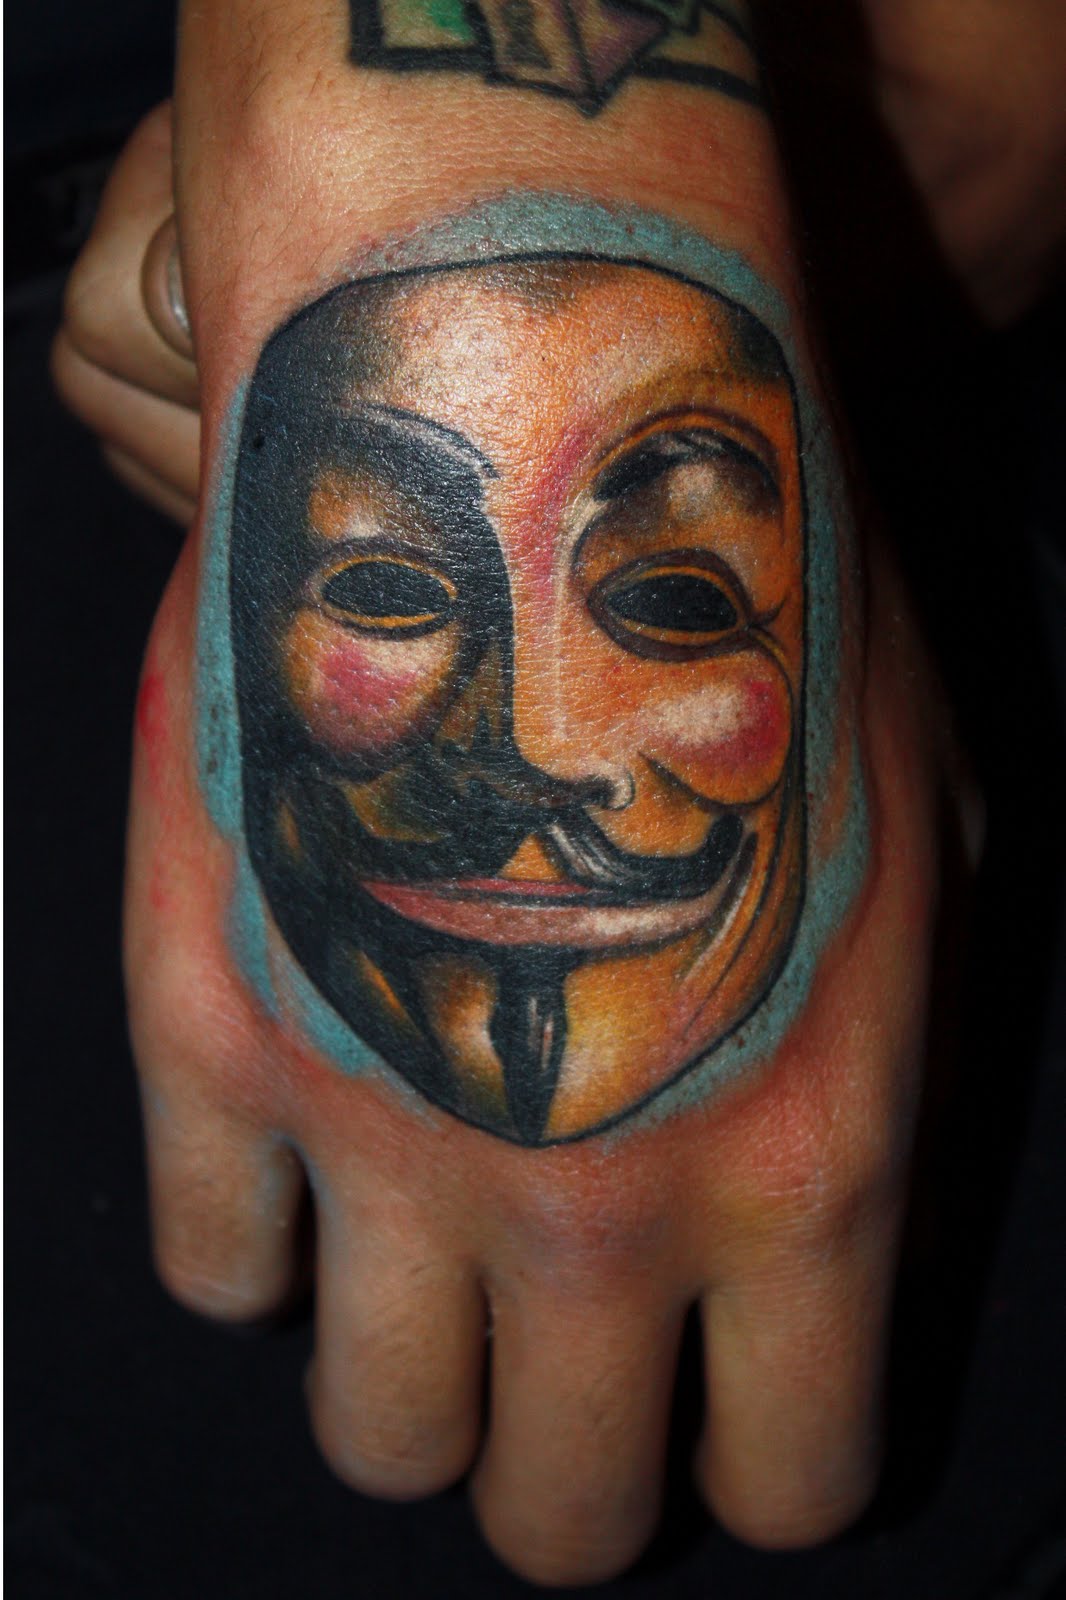 Posted in gallery: V for Vendetta tattoos.